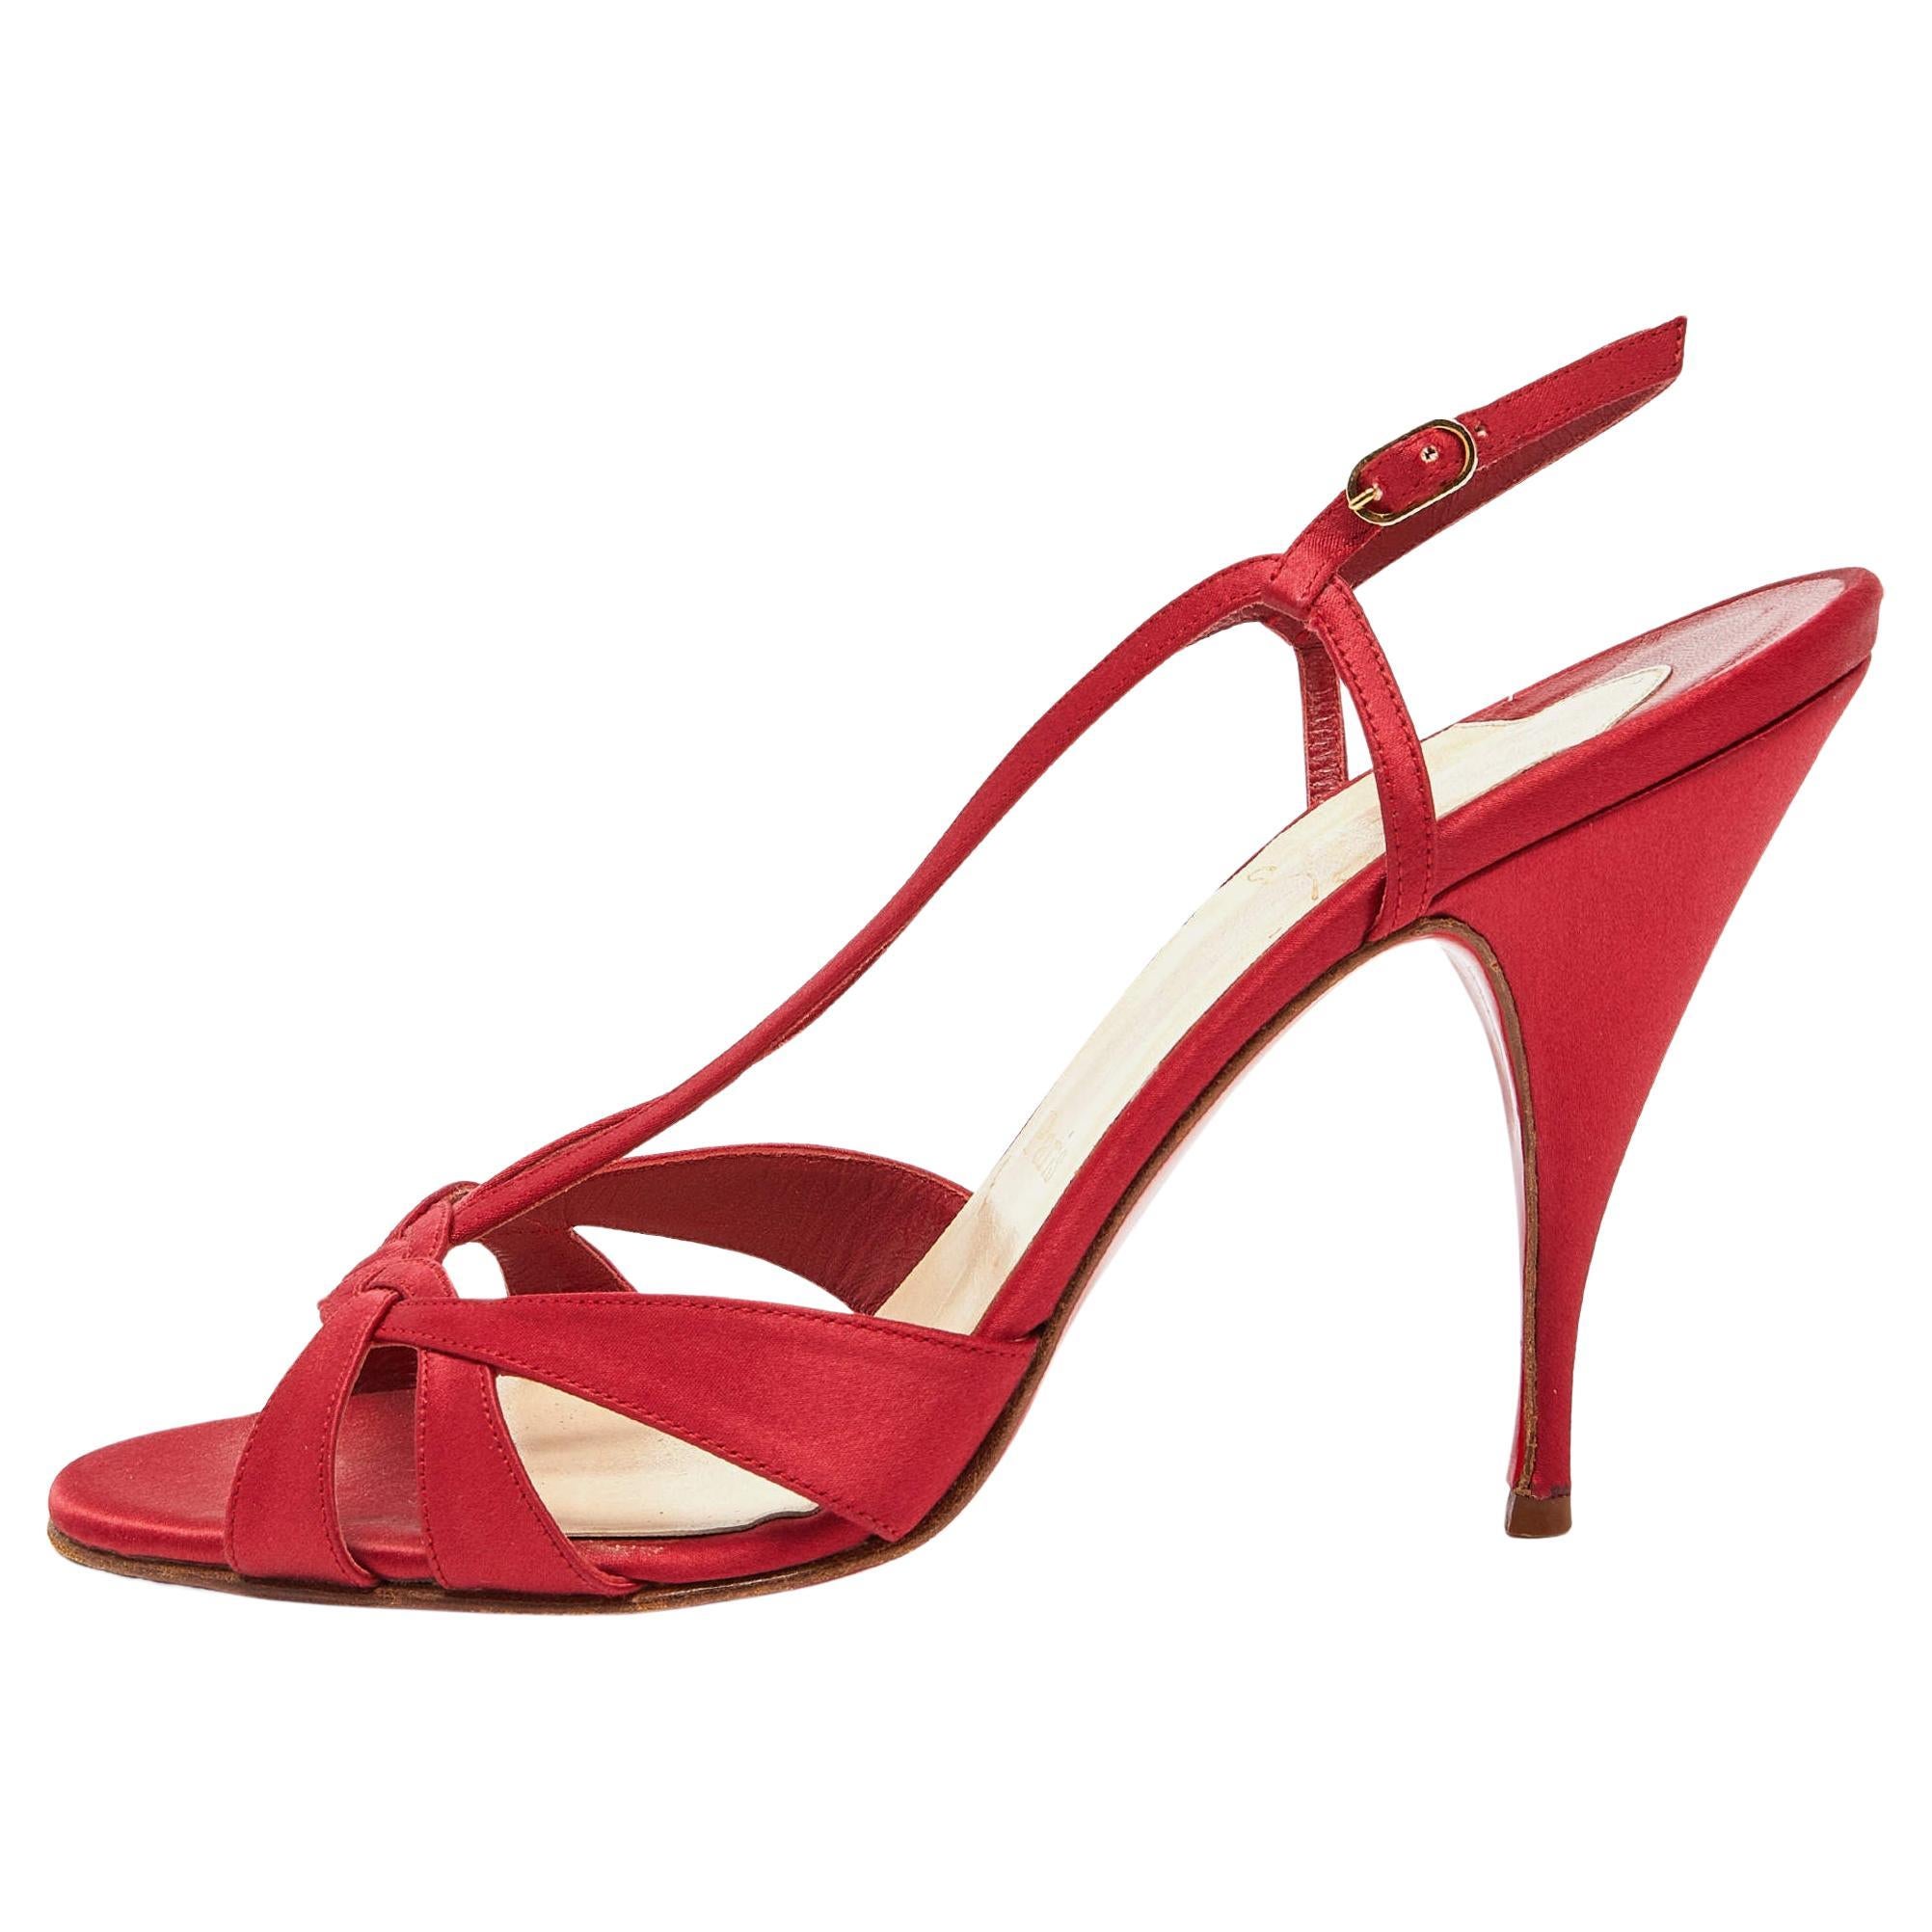 Christian Louboutin Red Satin Buckle Slingback Sandals Size 41 For Sale